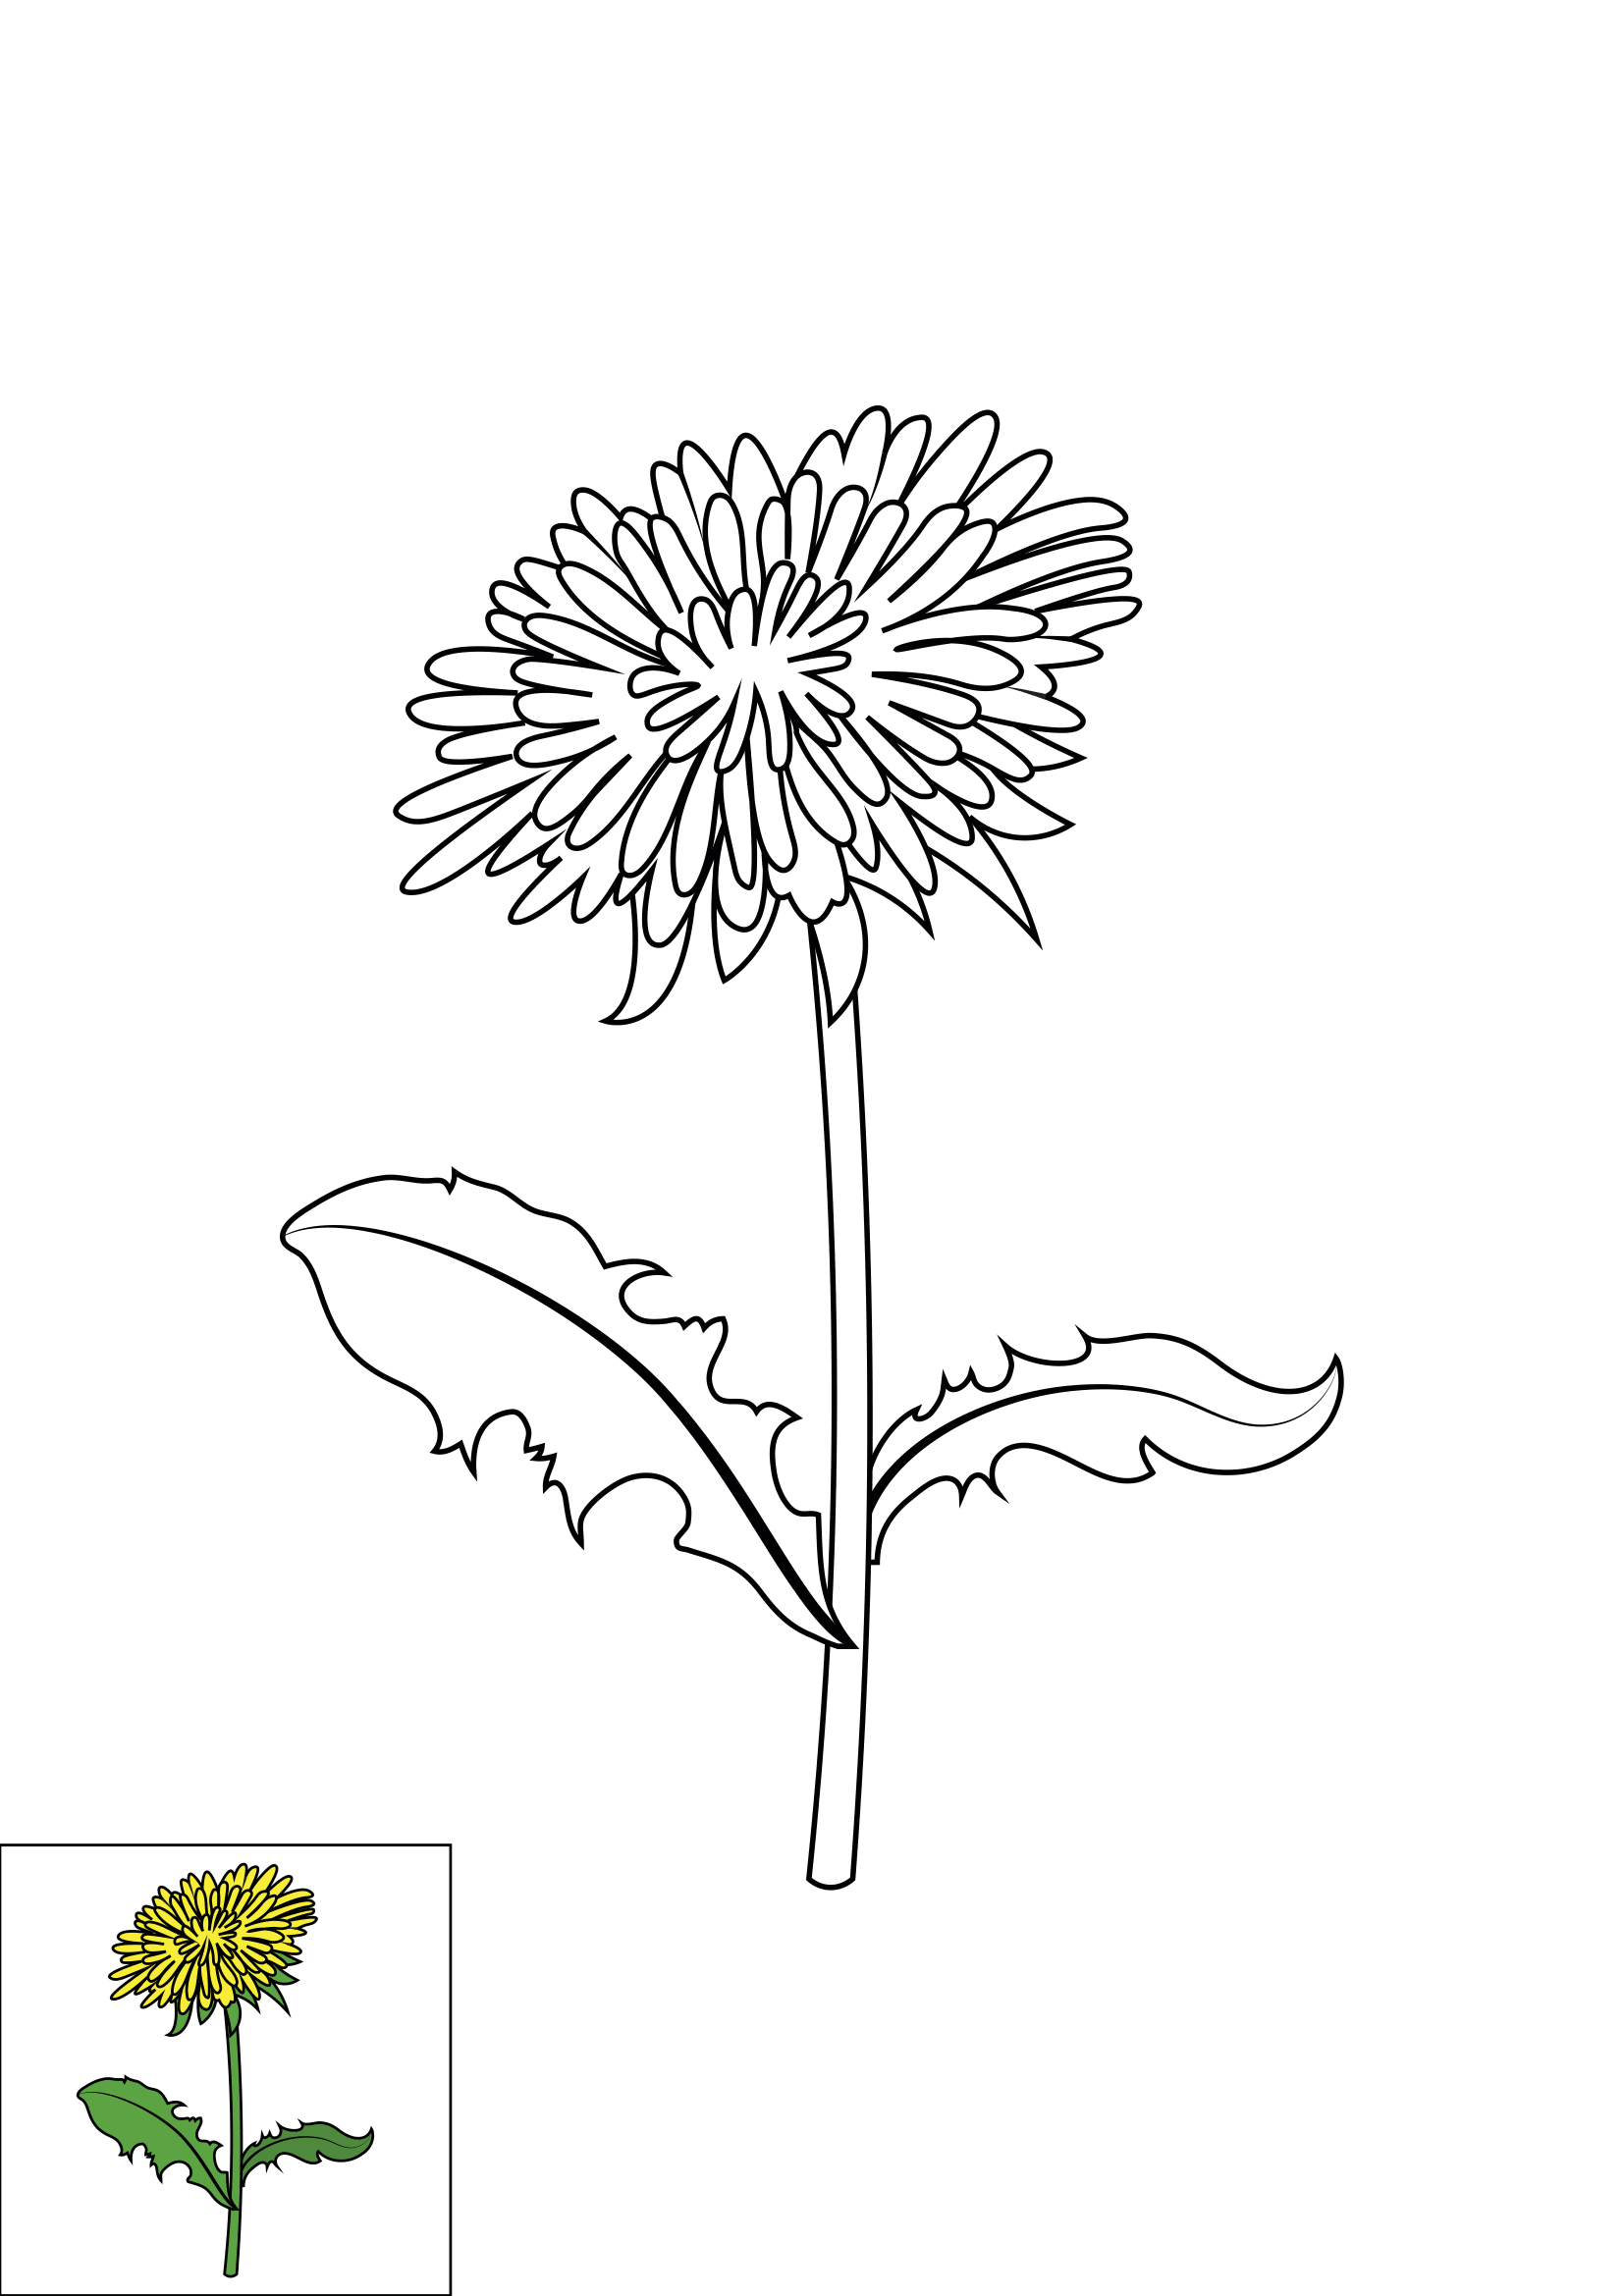 How to Draw A Dandelion Flower Step by Step Printable Color